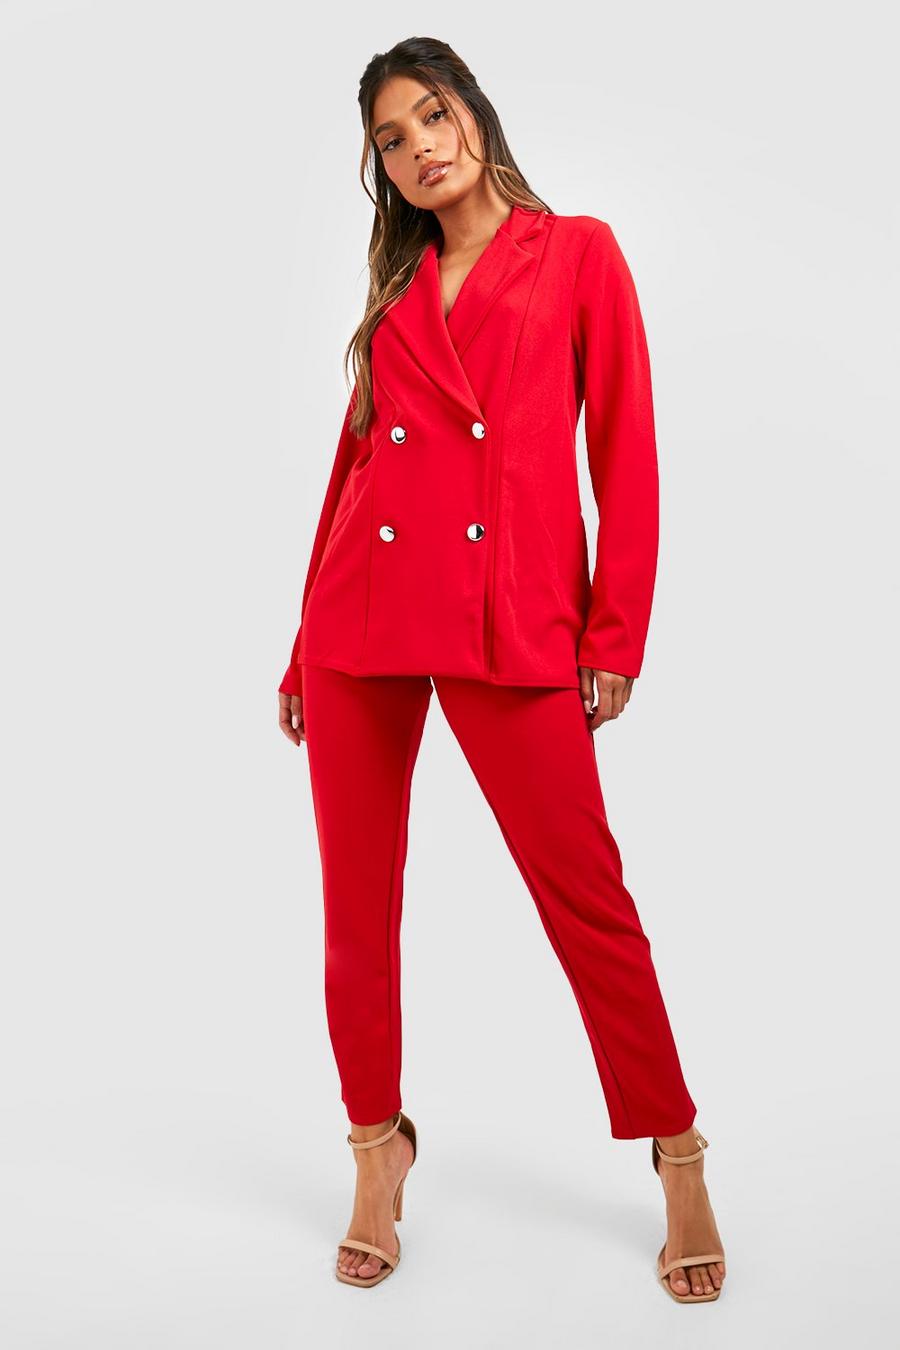 Womens Double Breasted Blazer And Pants Suit Set Boohoo Women Clothing Dresses Blazer Dresses 4 